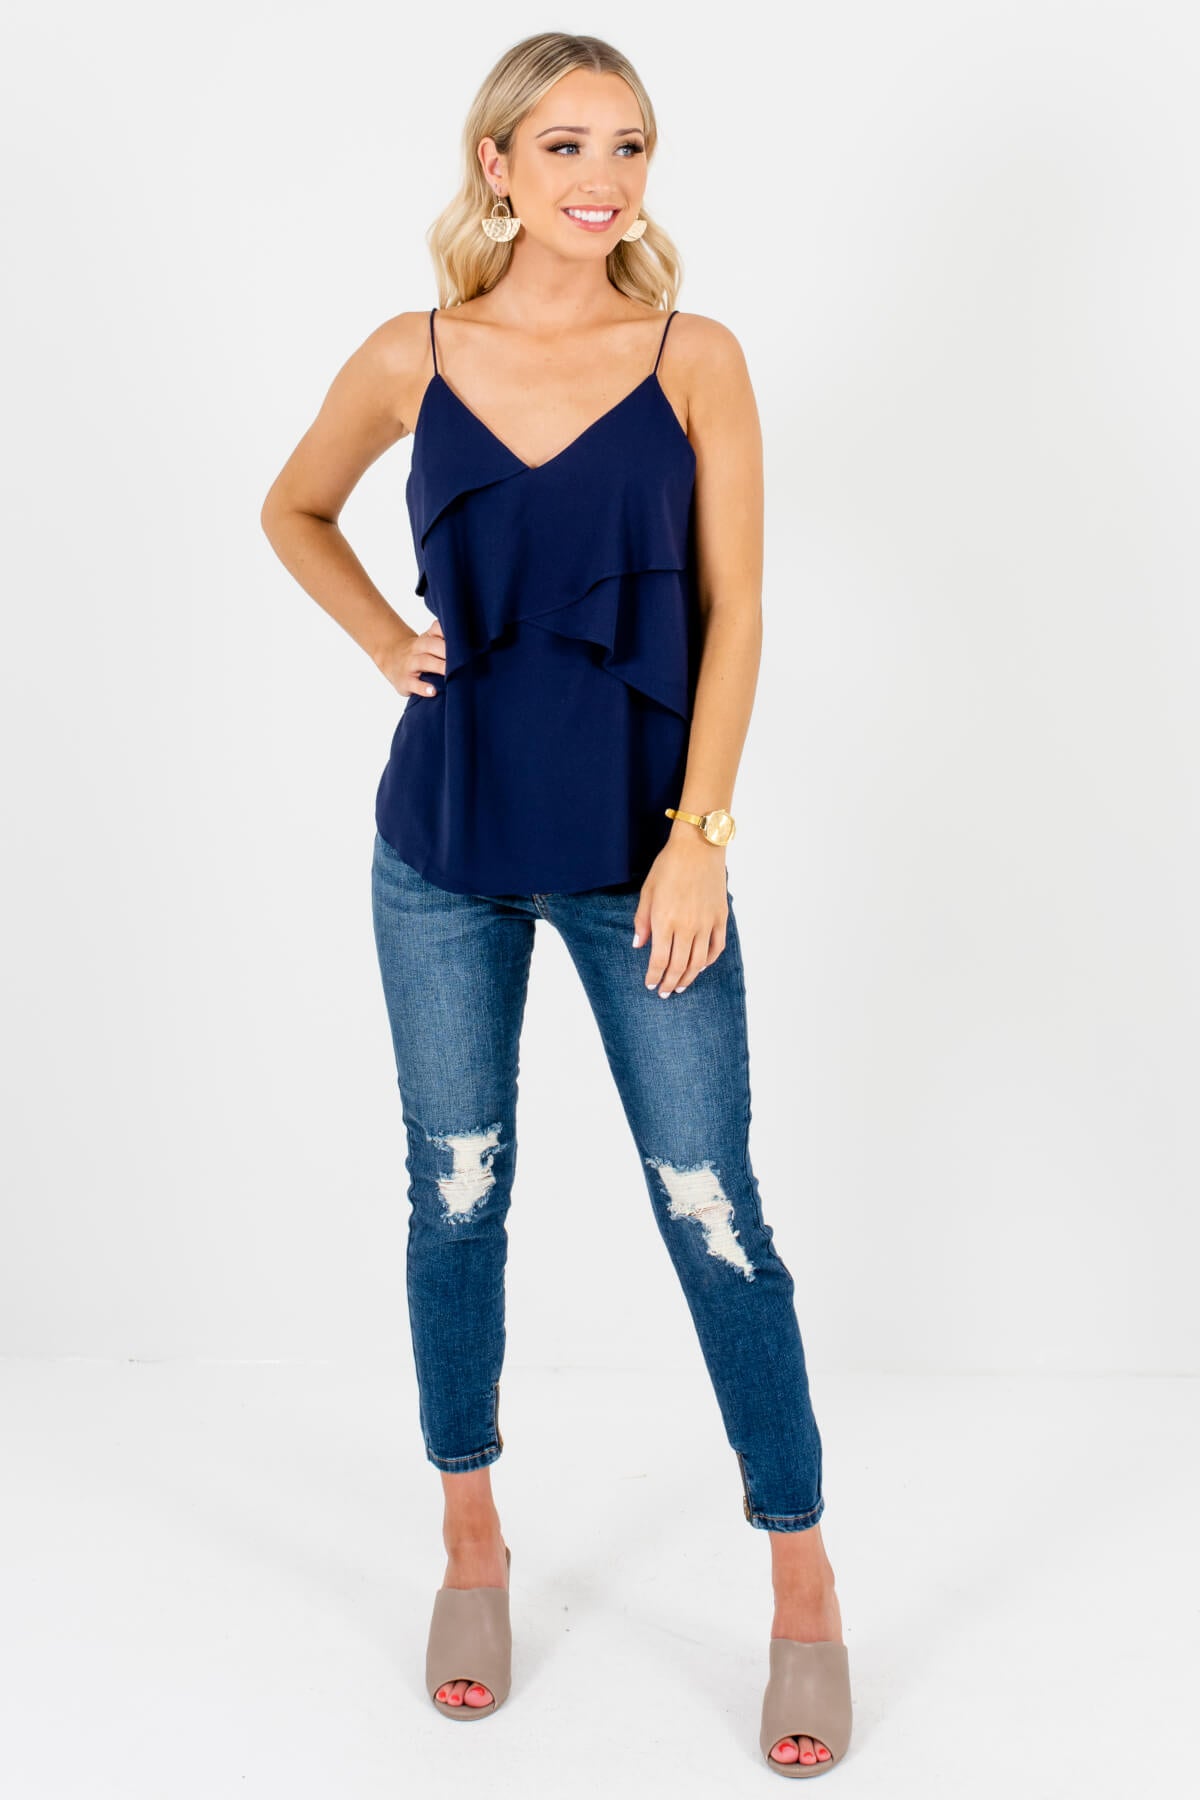 Navy Blue Cute and Comfortable Boutique Tank Tops for Women